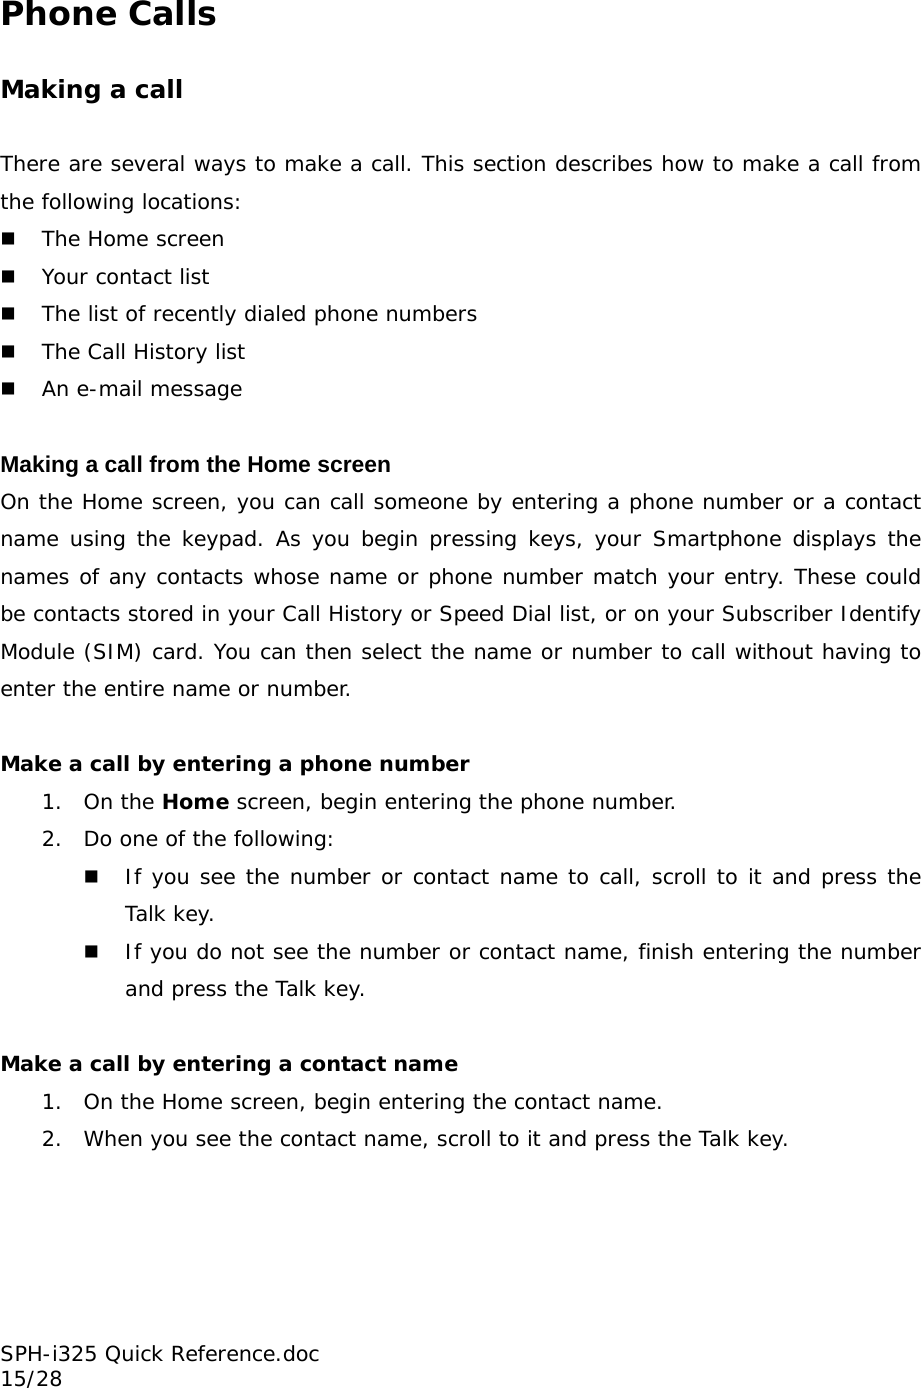 Phone Calls  Making a call  There are several ways to make a call. This section describes how to make a call from the following locations:  The Home screen  Your contact list  The list of recently dialed phone numbers  The Call History list   An e-mail message  Making a call from the Home screen On the Home screen, you can call someone by entering a phone number or a contact name using the keypad. As you begin pressing keys, your Smartphone displays the names of any contacts whose name or phone number match your entry. These could be contacts stored in your Call History or Speed Dial list, or on your Subscriber Identify Module (SIM) card. You can then select the name or number to call without having to enter the entire name or number.   Make a call by entering a phone number 1. On the Home screen, begin entering the phone number.  2. Do one of the following:  If you see the number or contact name to call, scroll to it and press the Talk key.  If you do not see the number or contact name, finish entering the number and press the Talk key.  Make a call by entering a contact name 1. On the Home screen, begin entering the contact name. 2. When you see the contact name, scroll to it and press the Talk key. SPH-i325 Quick Reference.doc                                                          15/28 